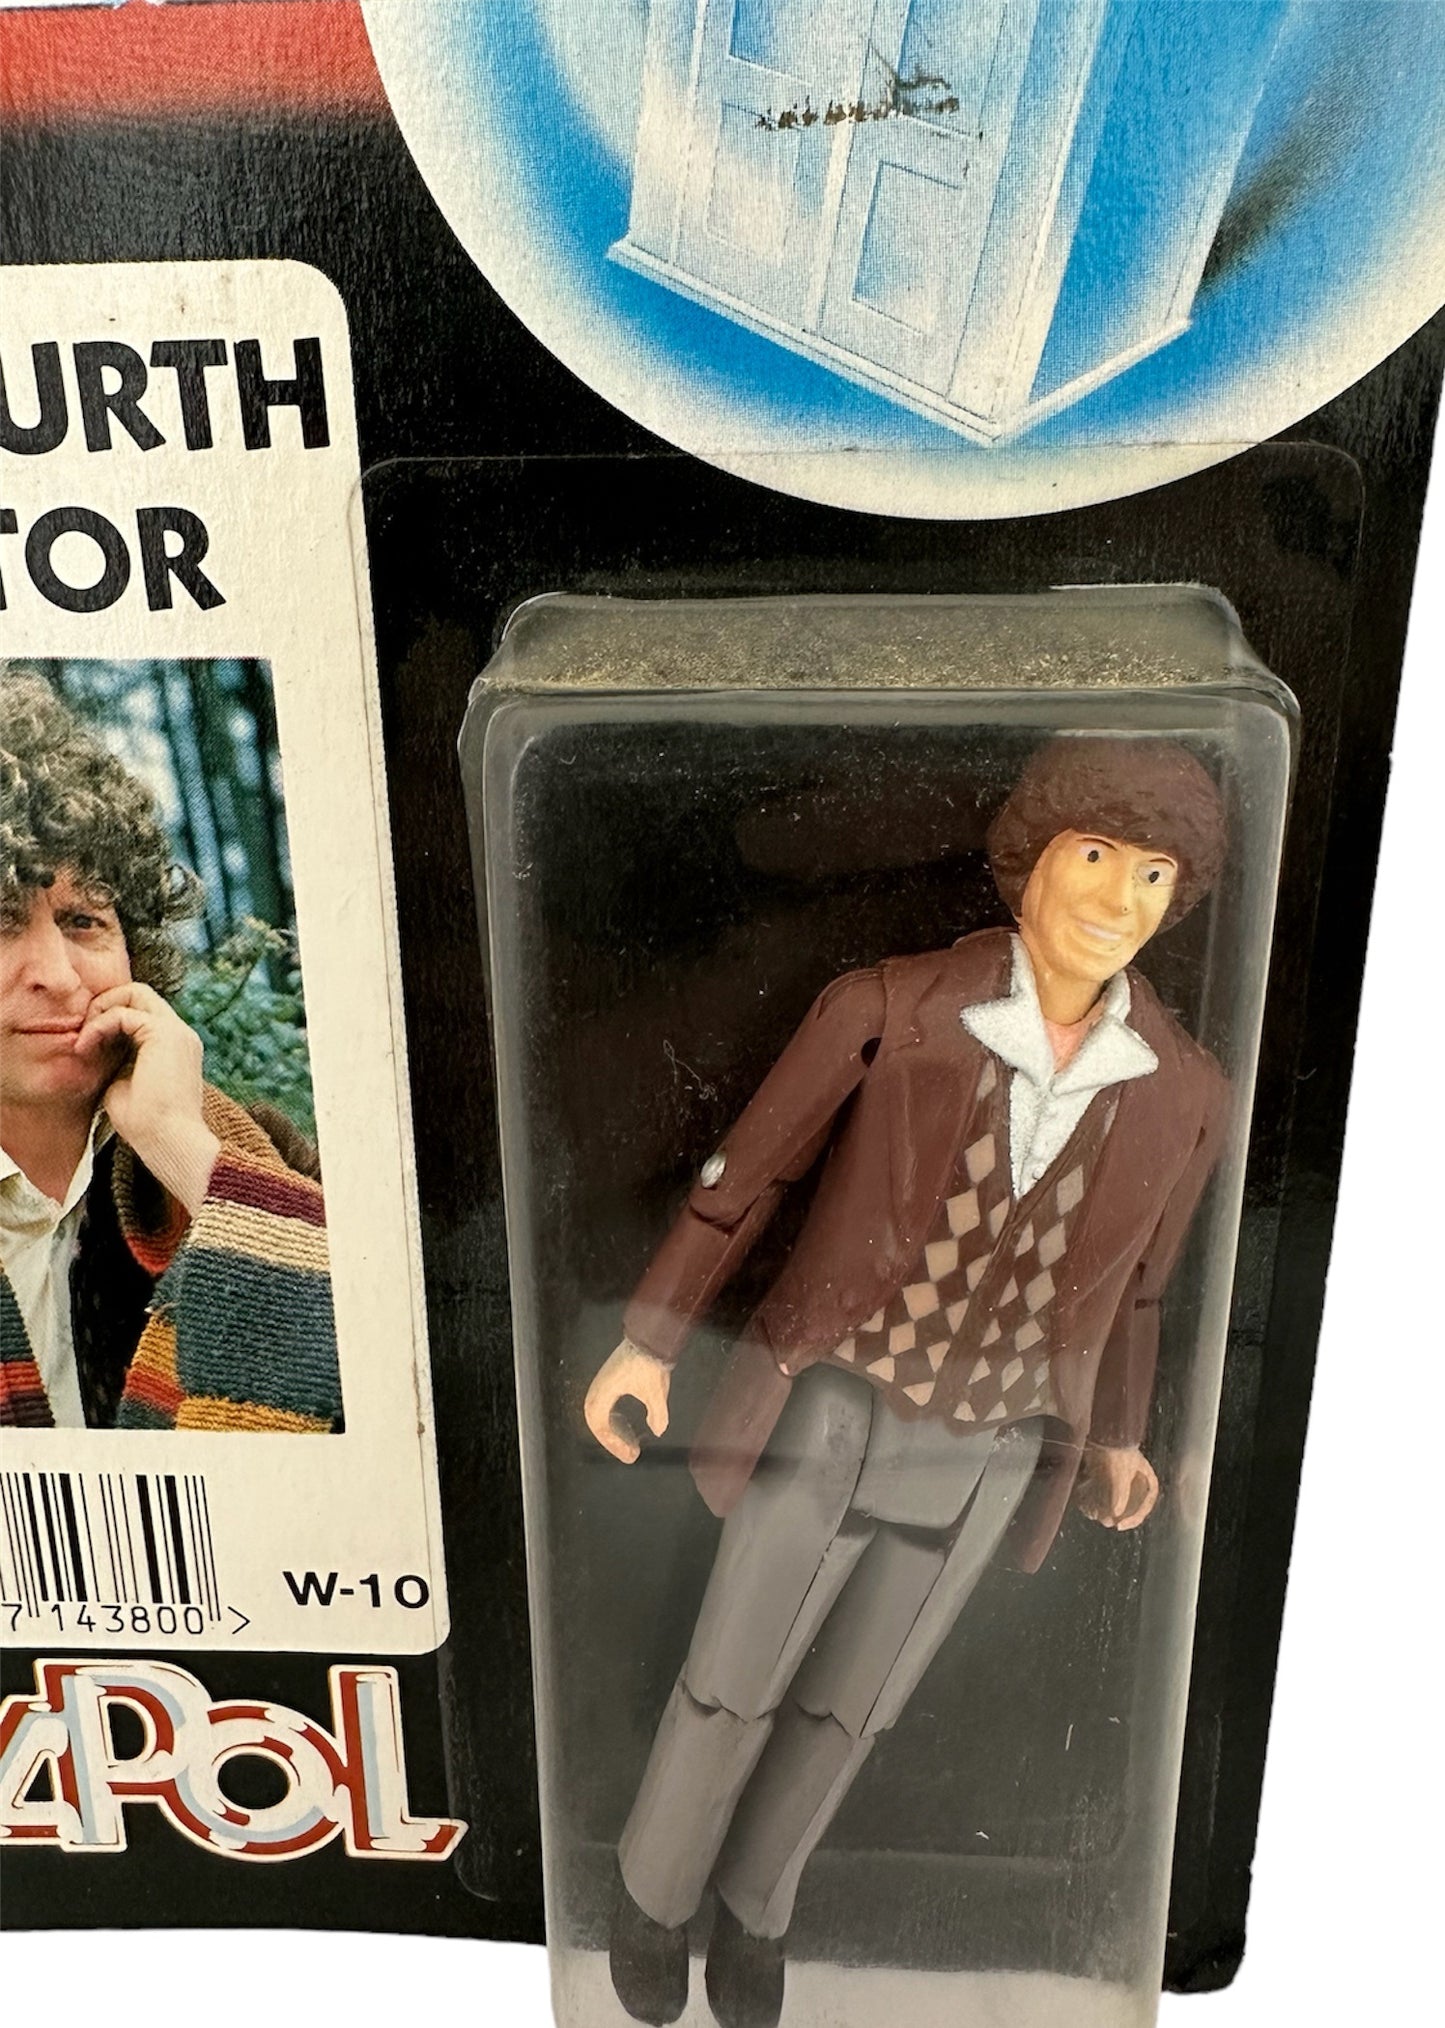 Vintage Dapol 1987 Doctor Dr Who The 4th Doctor In Brown Jacket Action Figure As Portrayed By Tom Baker - Brand New Factory Sealed Shop Stock Room Find